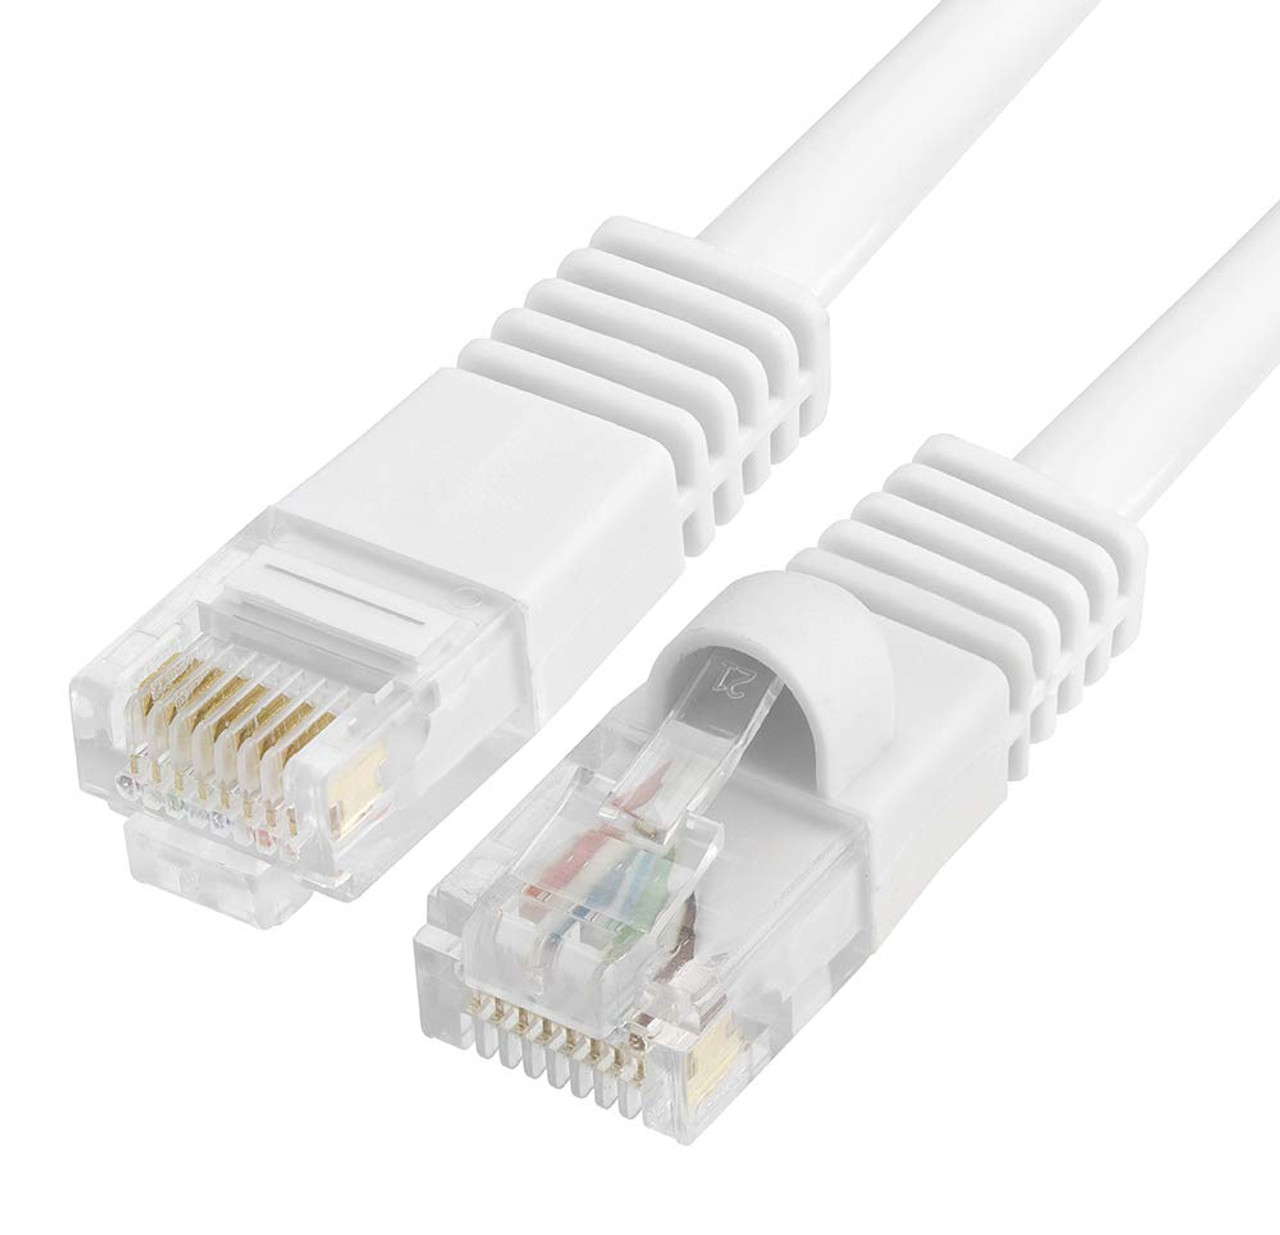 Cat5e Network Ethernet Cable - Computer LAN Cable 1Gbps - 350 MHz, Gold Plated RJ45 Connectors - 3 Feet White